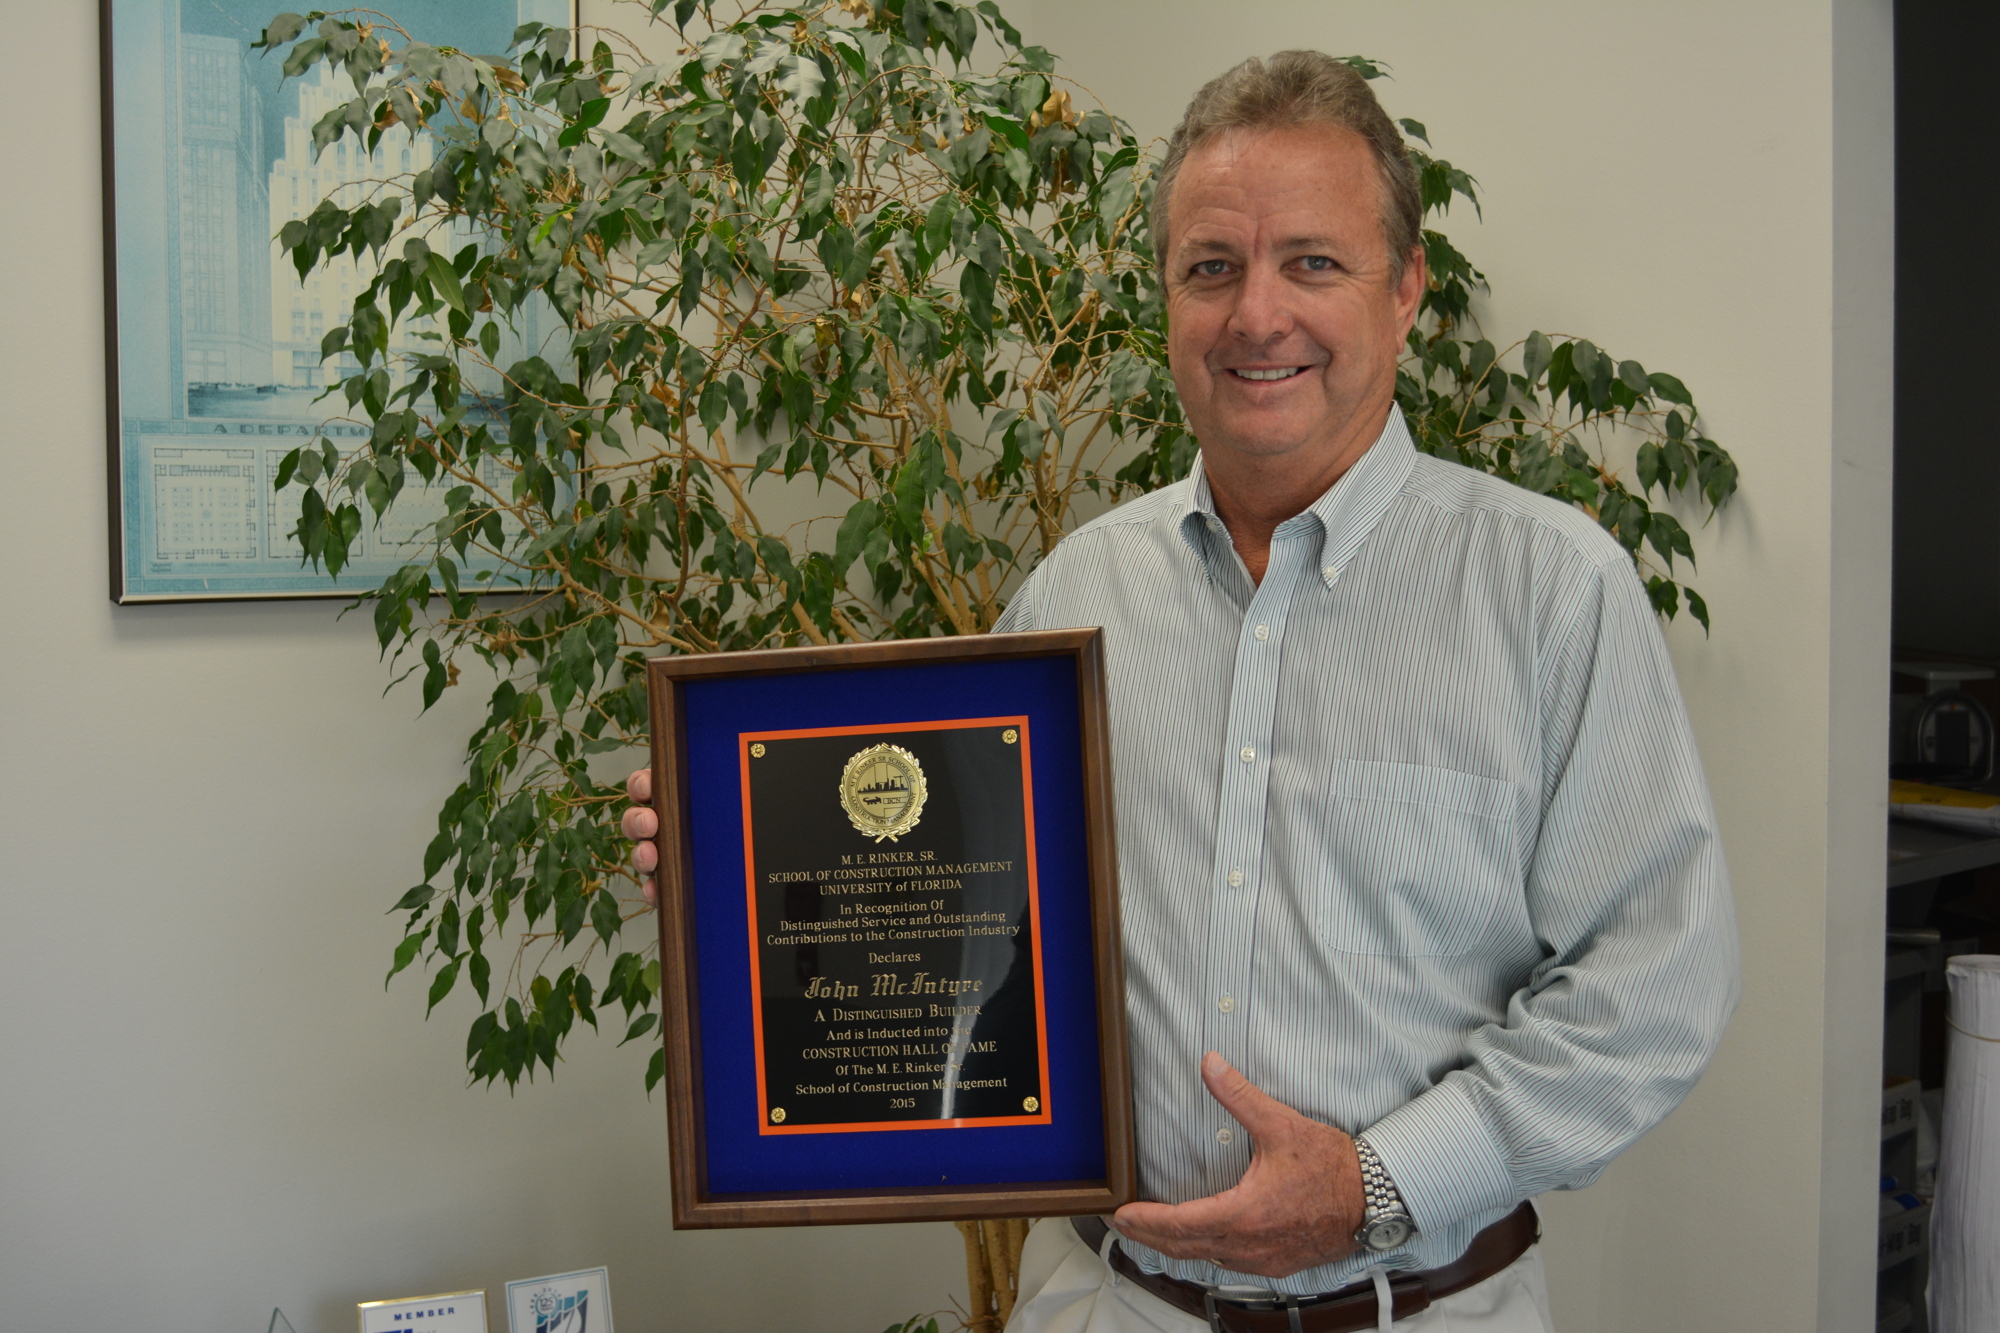 Tara's John McIntyre shows off his University of Florida Construction Hall of Fame plaque that he received in November.